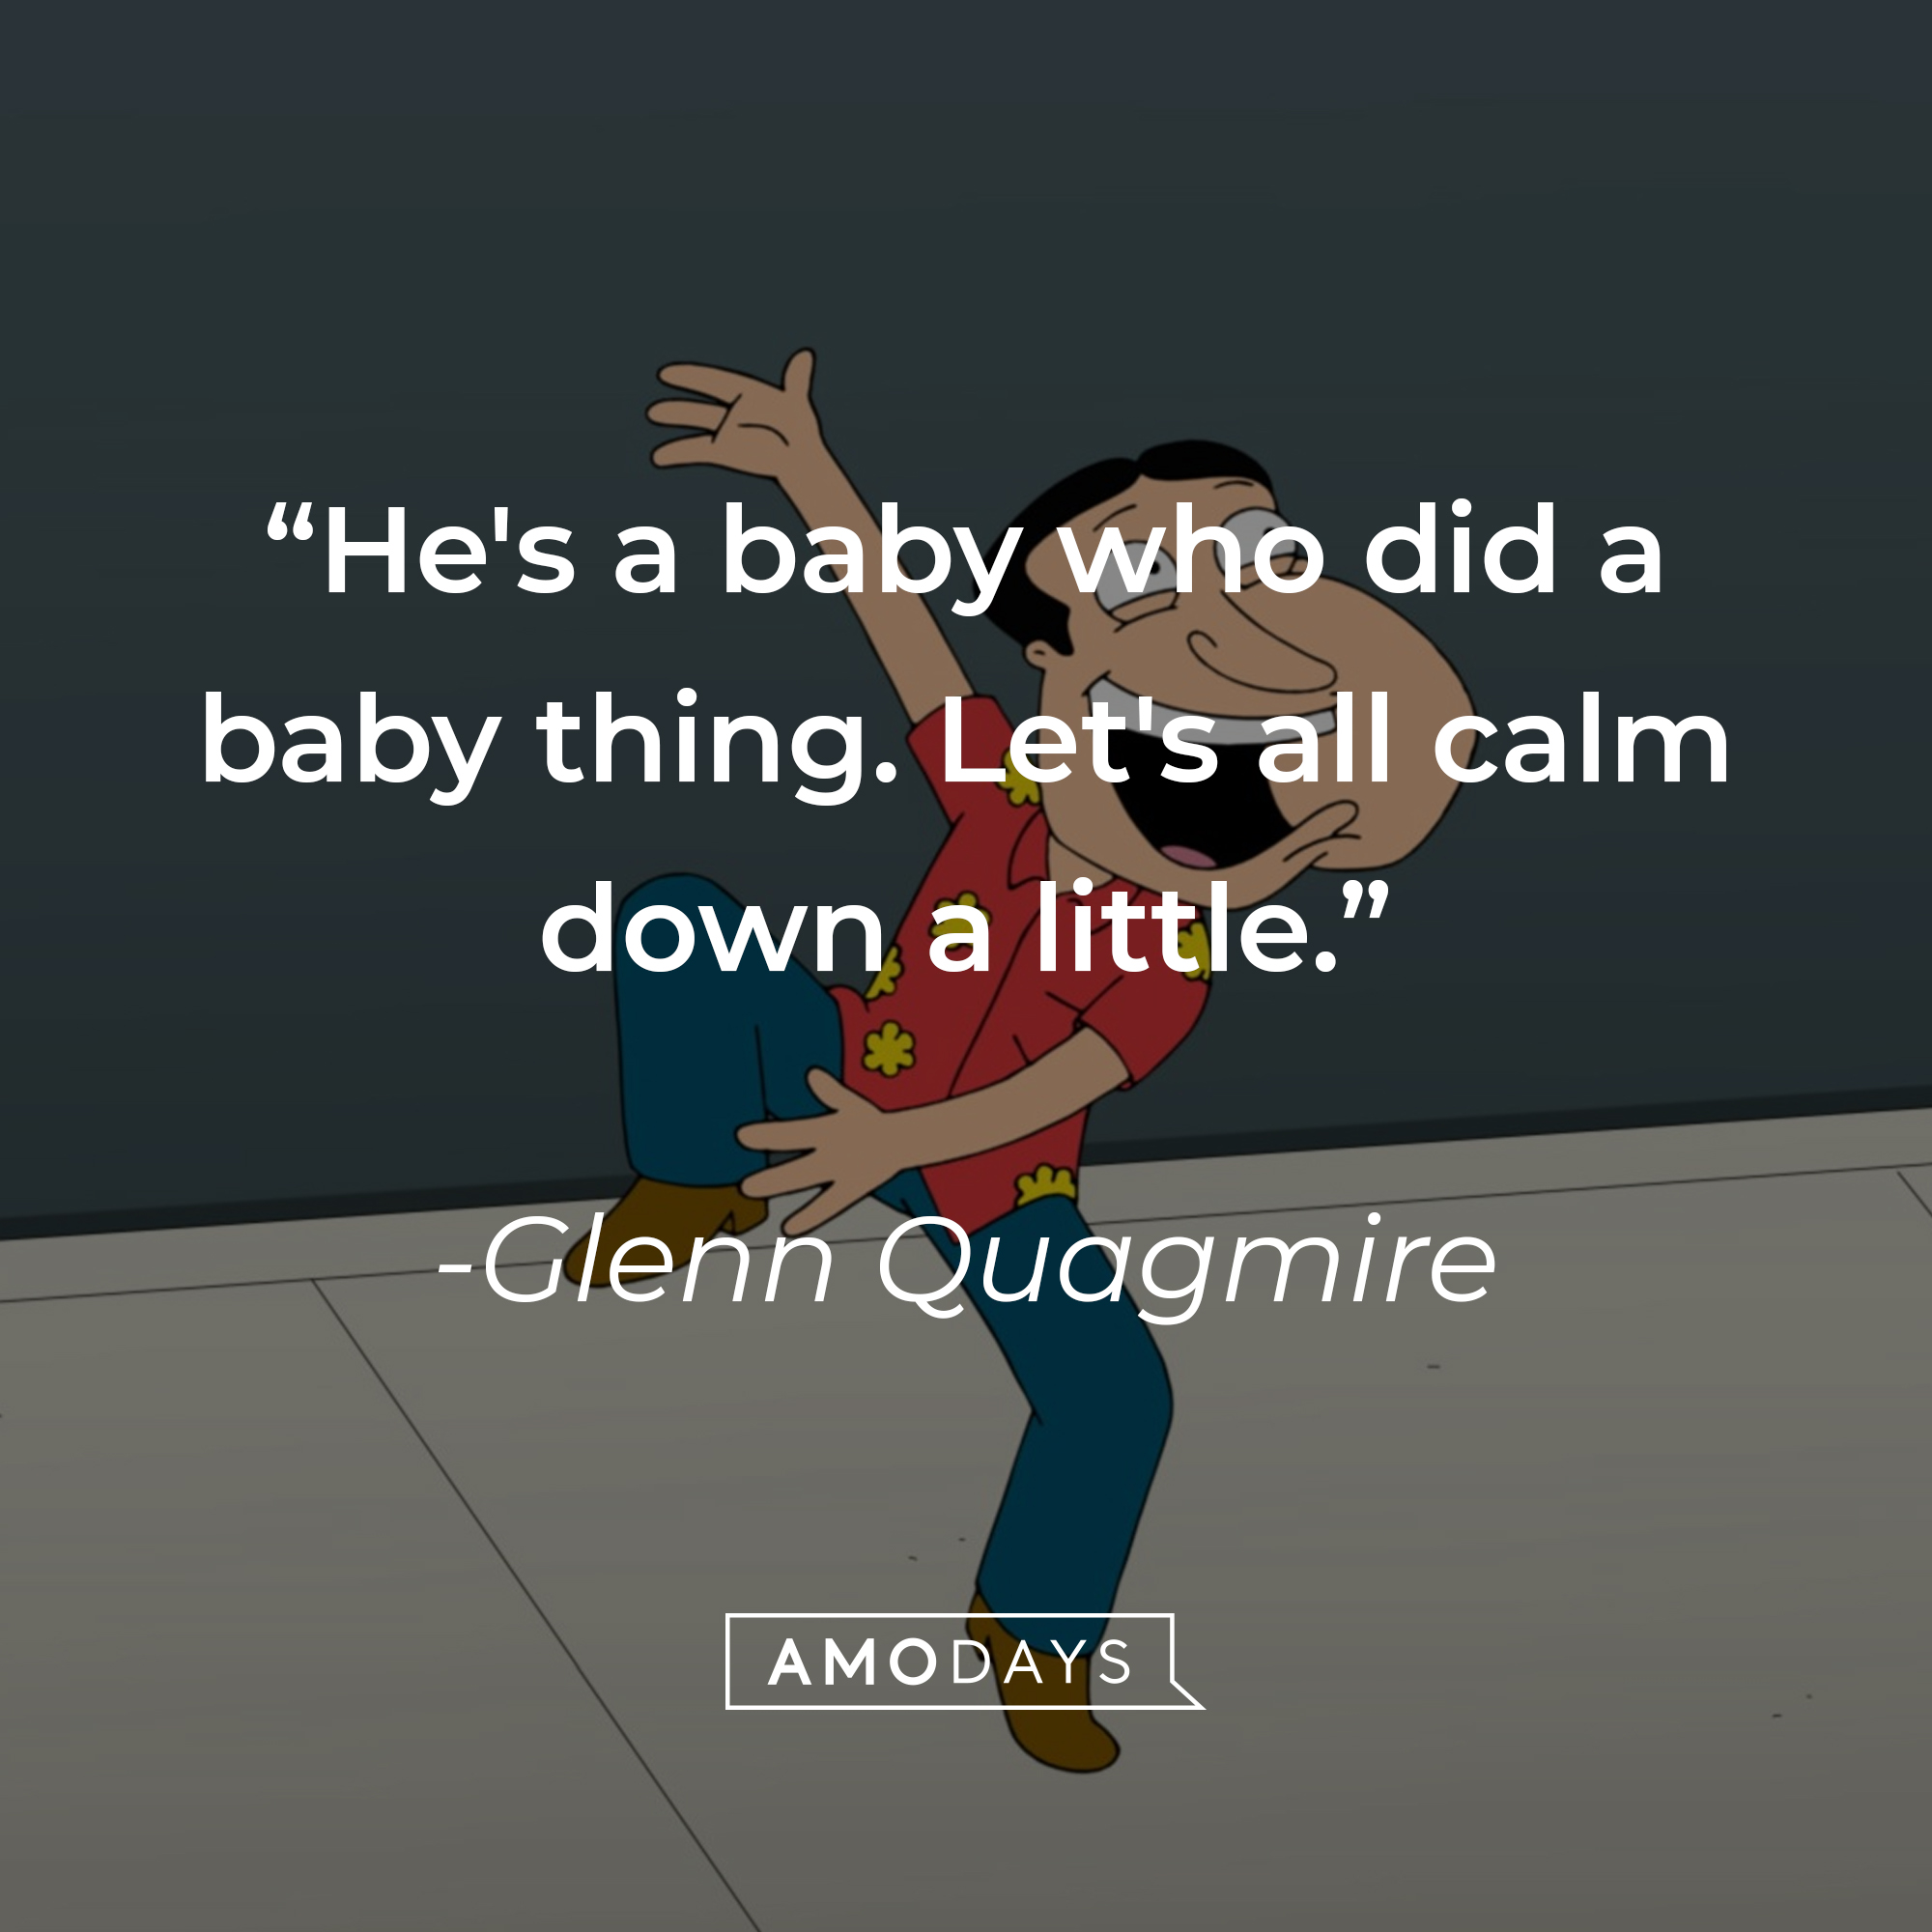 Glenn Quagmire with his quote: “He's a baby who did a baby thing. Let's all calm down a little.” | Source: facebook.com/FamilyGuy